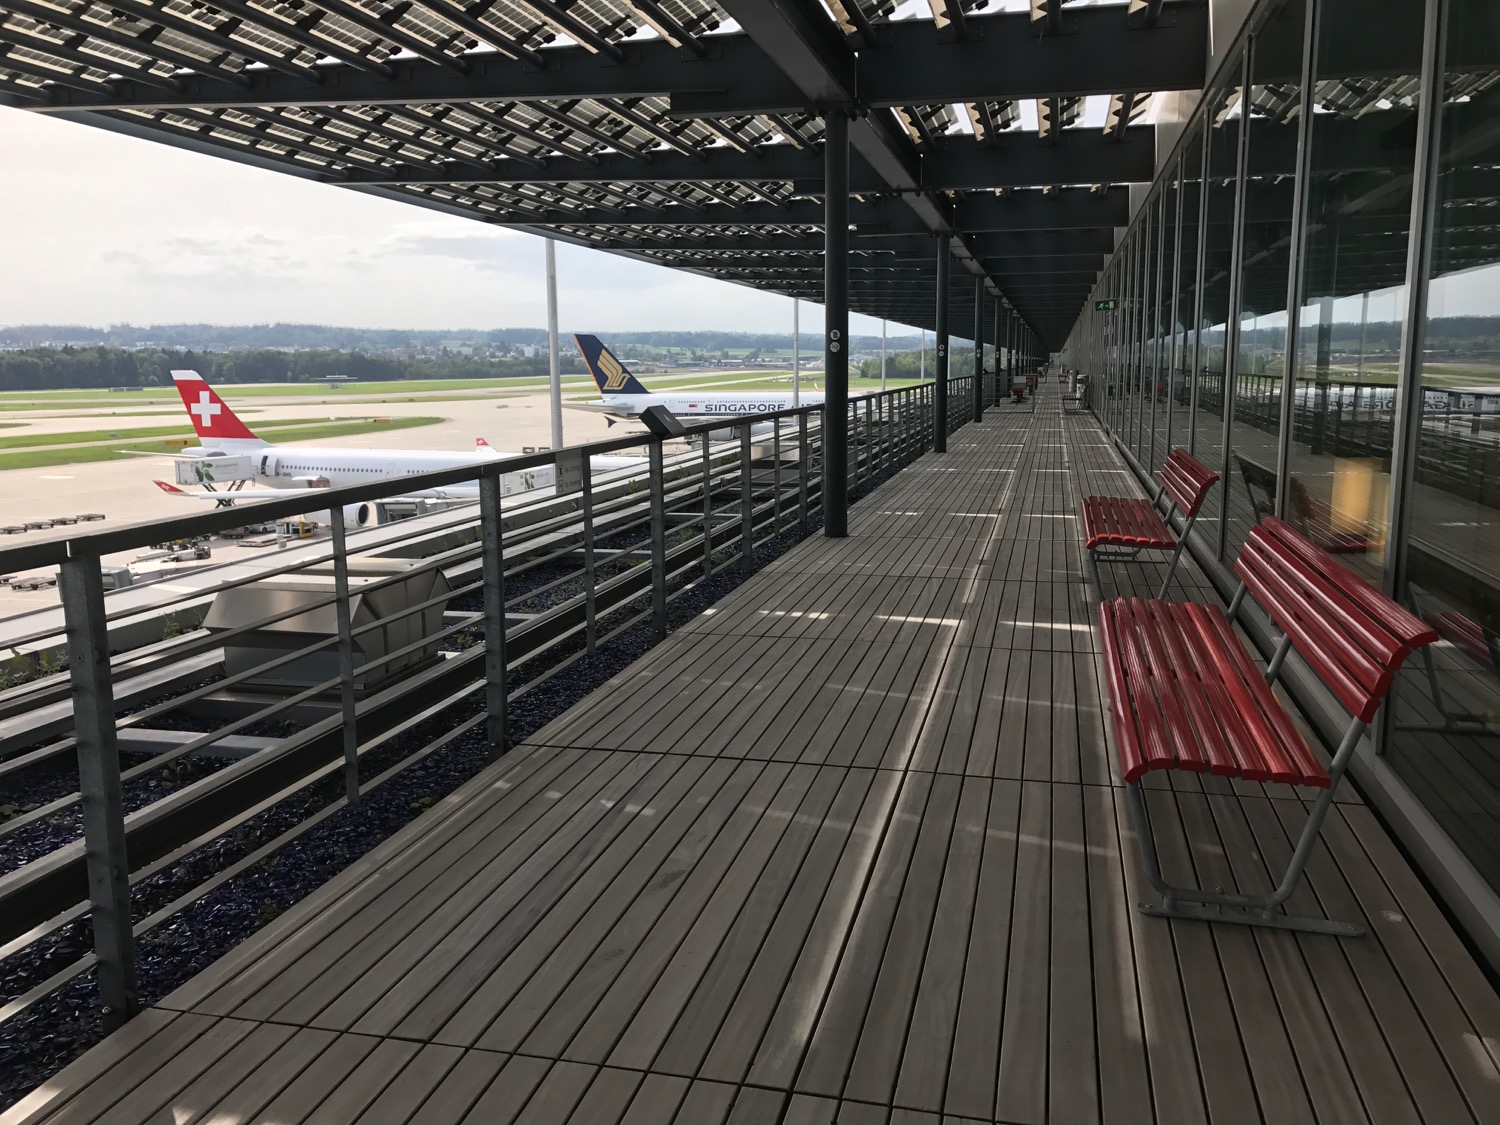 a wooden walkway with benches and a plane in the background